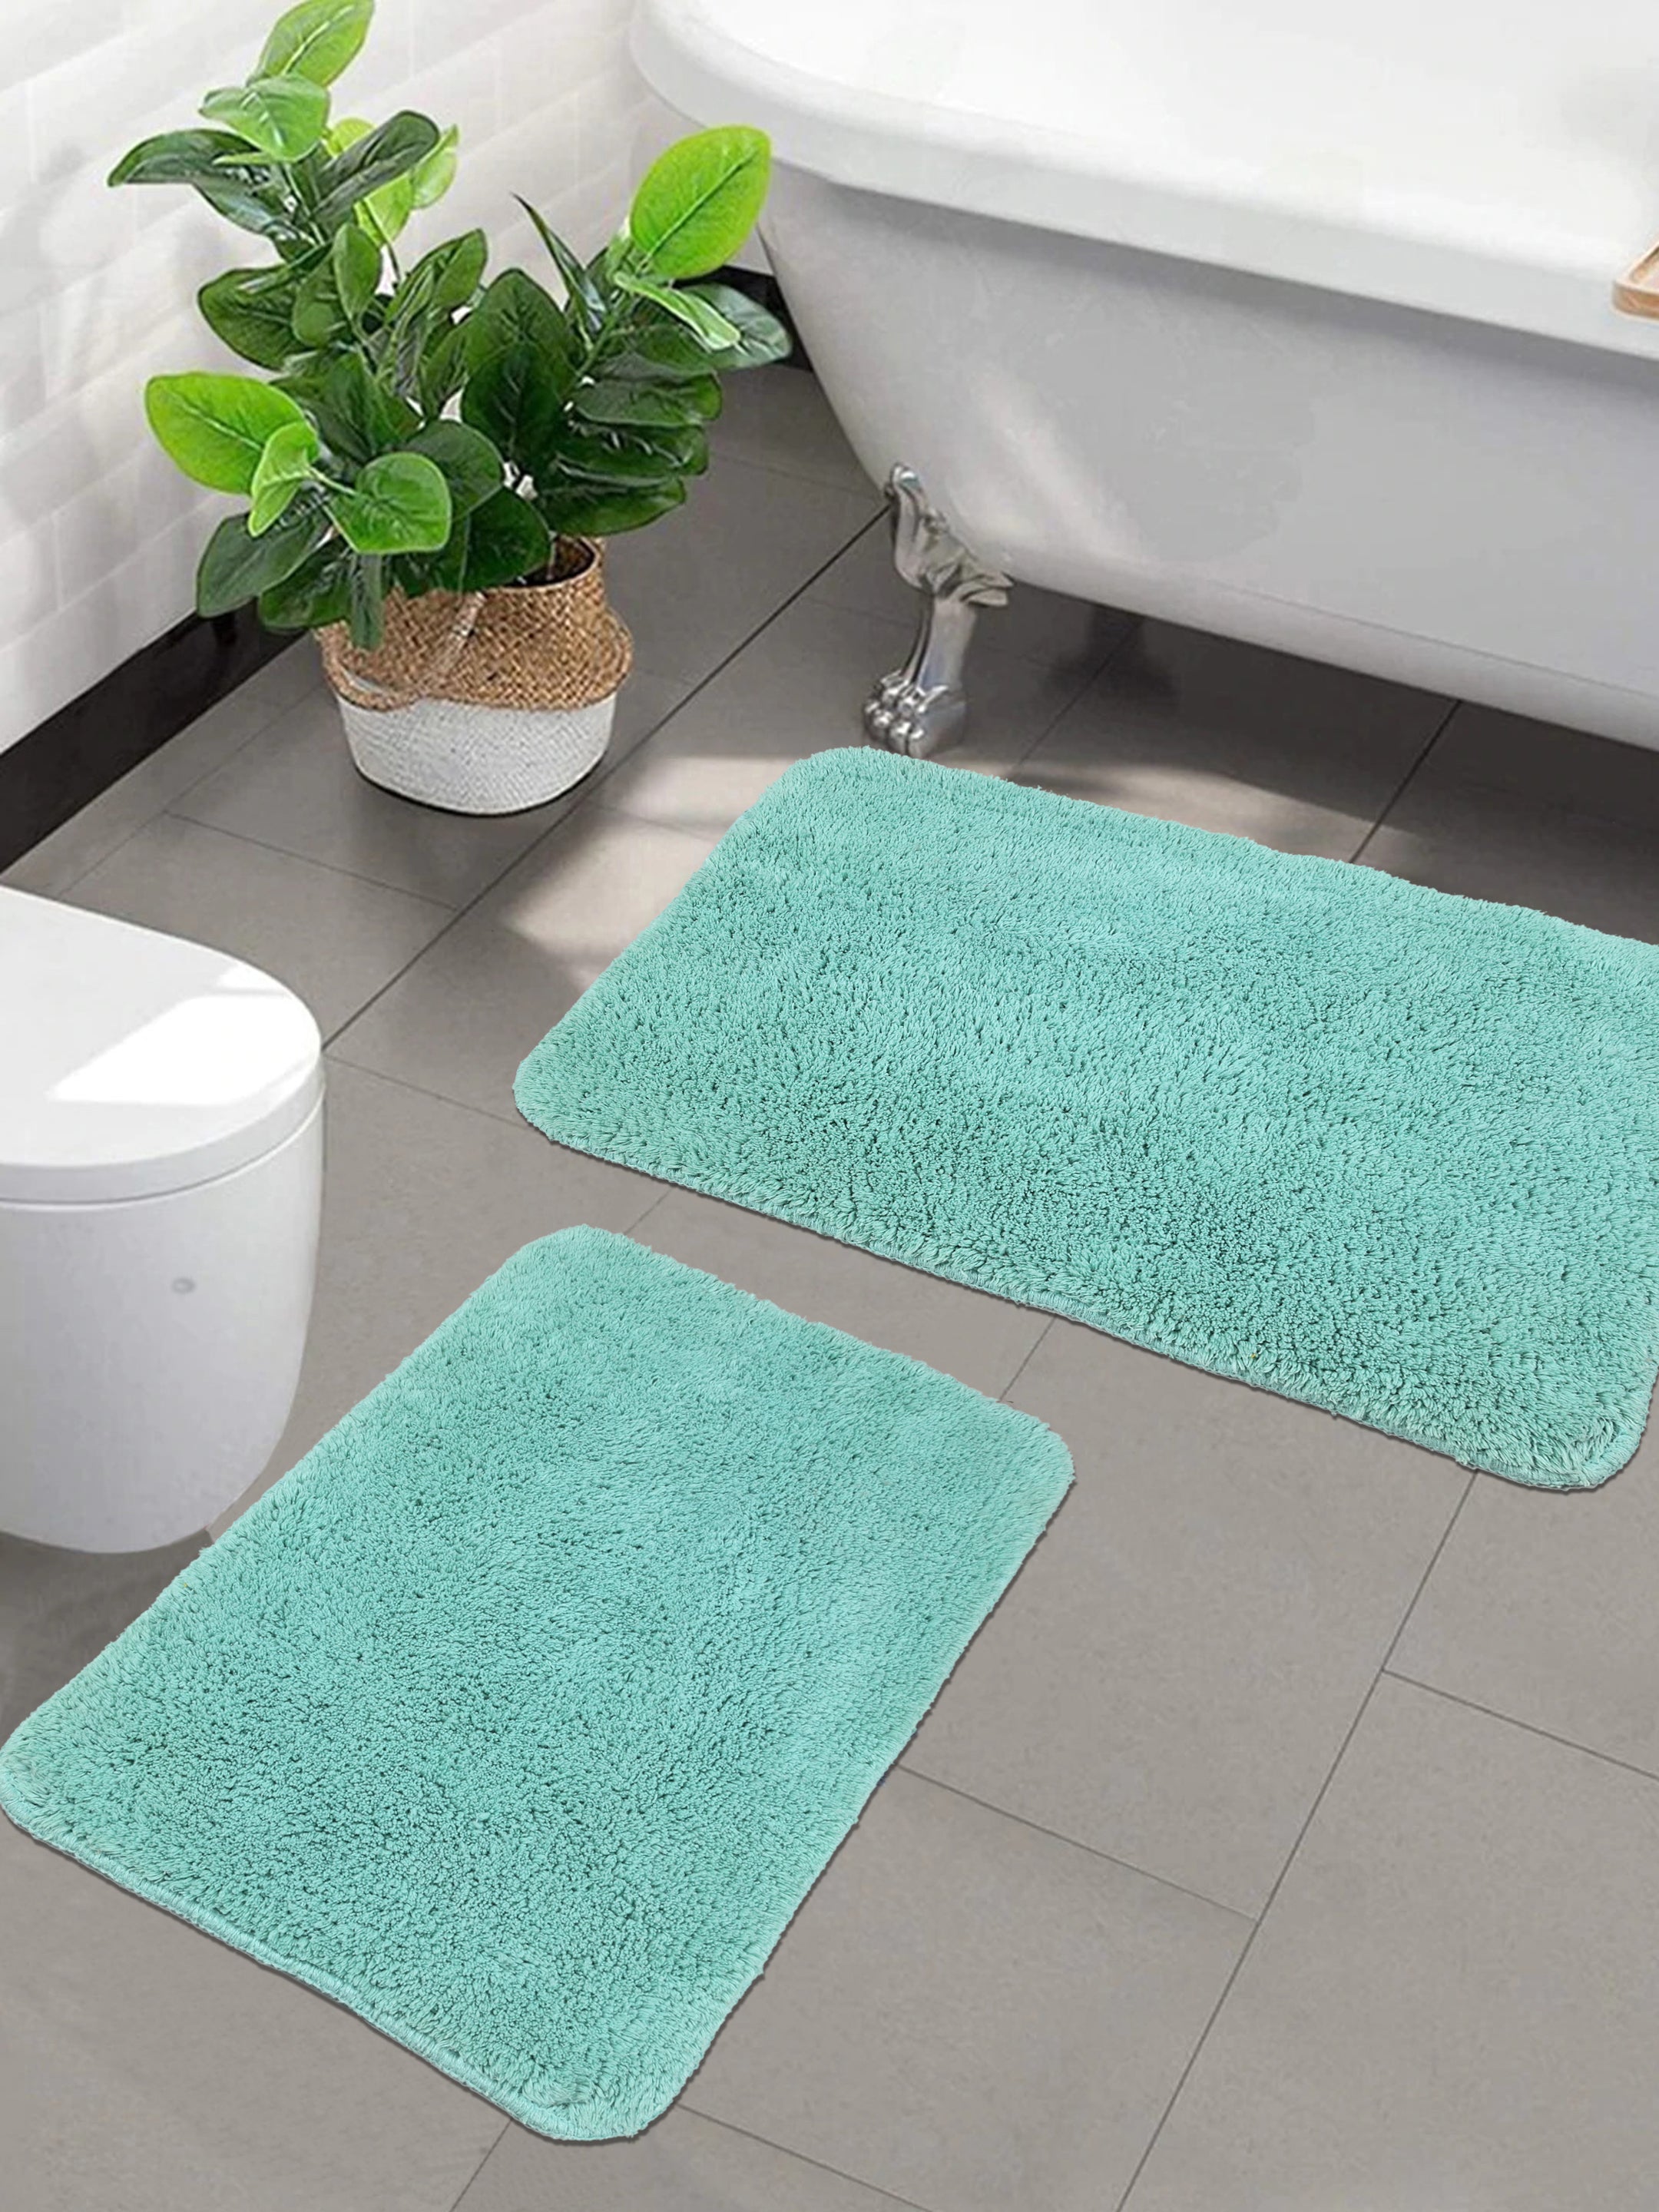 Bath Mats: Buy Bath Mats Online in India at Best Price